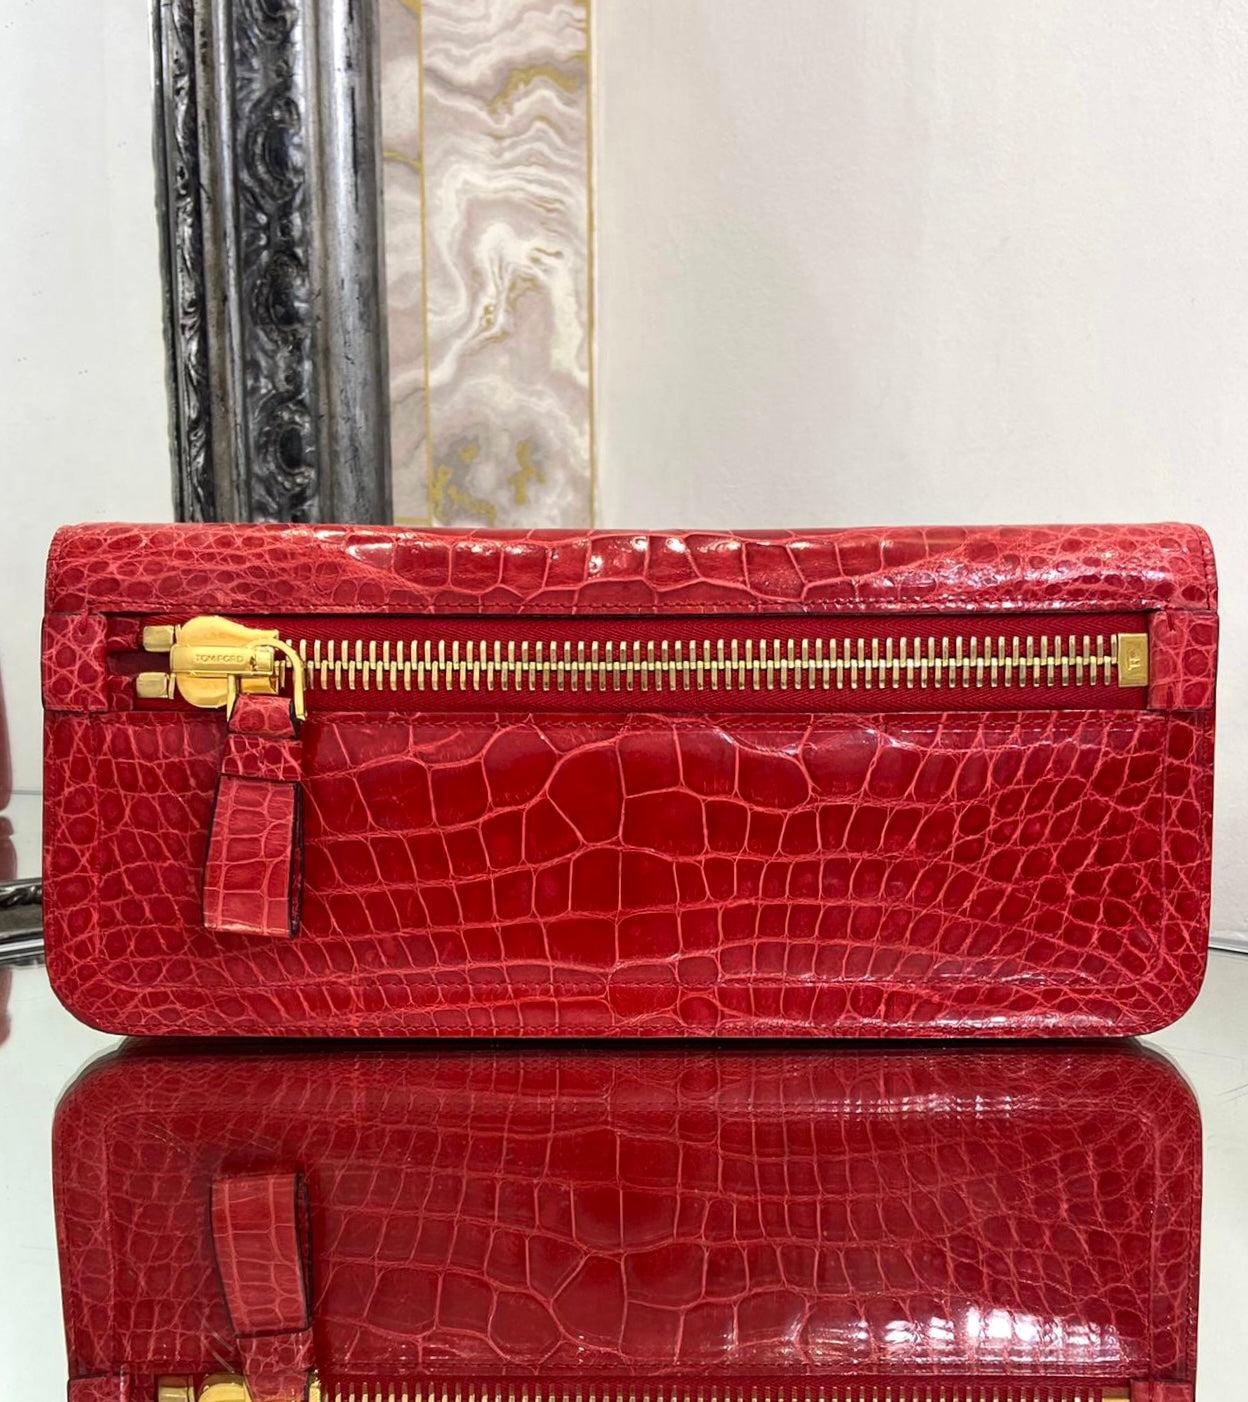 Tom Ford Alligator Skin Clutch Bag

Iconic oversized zip to the front. Gold hardware with snap closure and lined with red suede. One zip pocket to the inside.

Additional information:
Size – 30.5 W x 4 D x 14 H cm
Composition- Alligator Skin